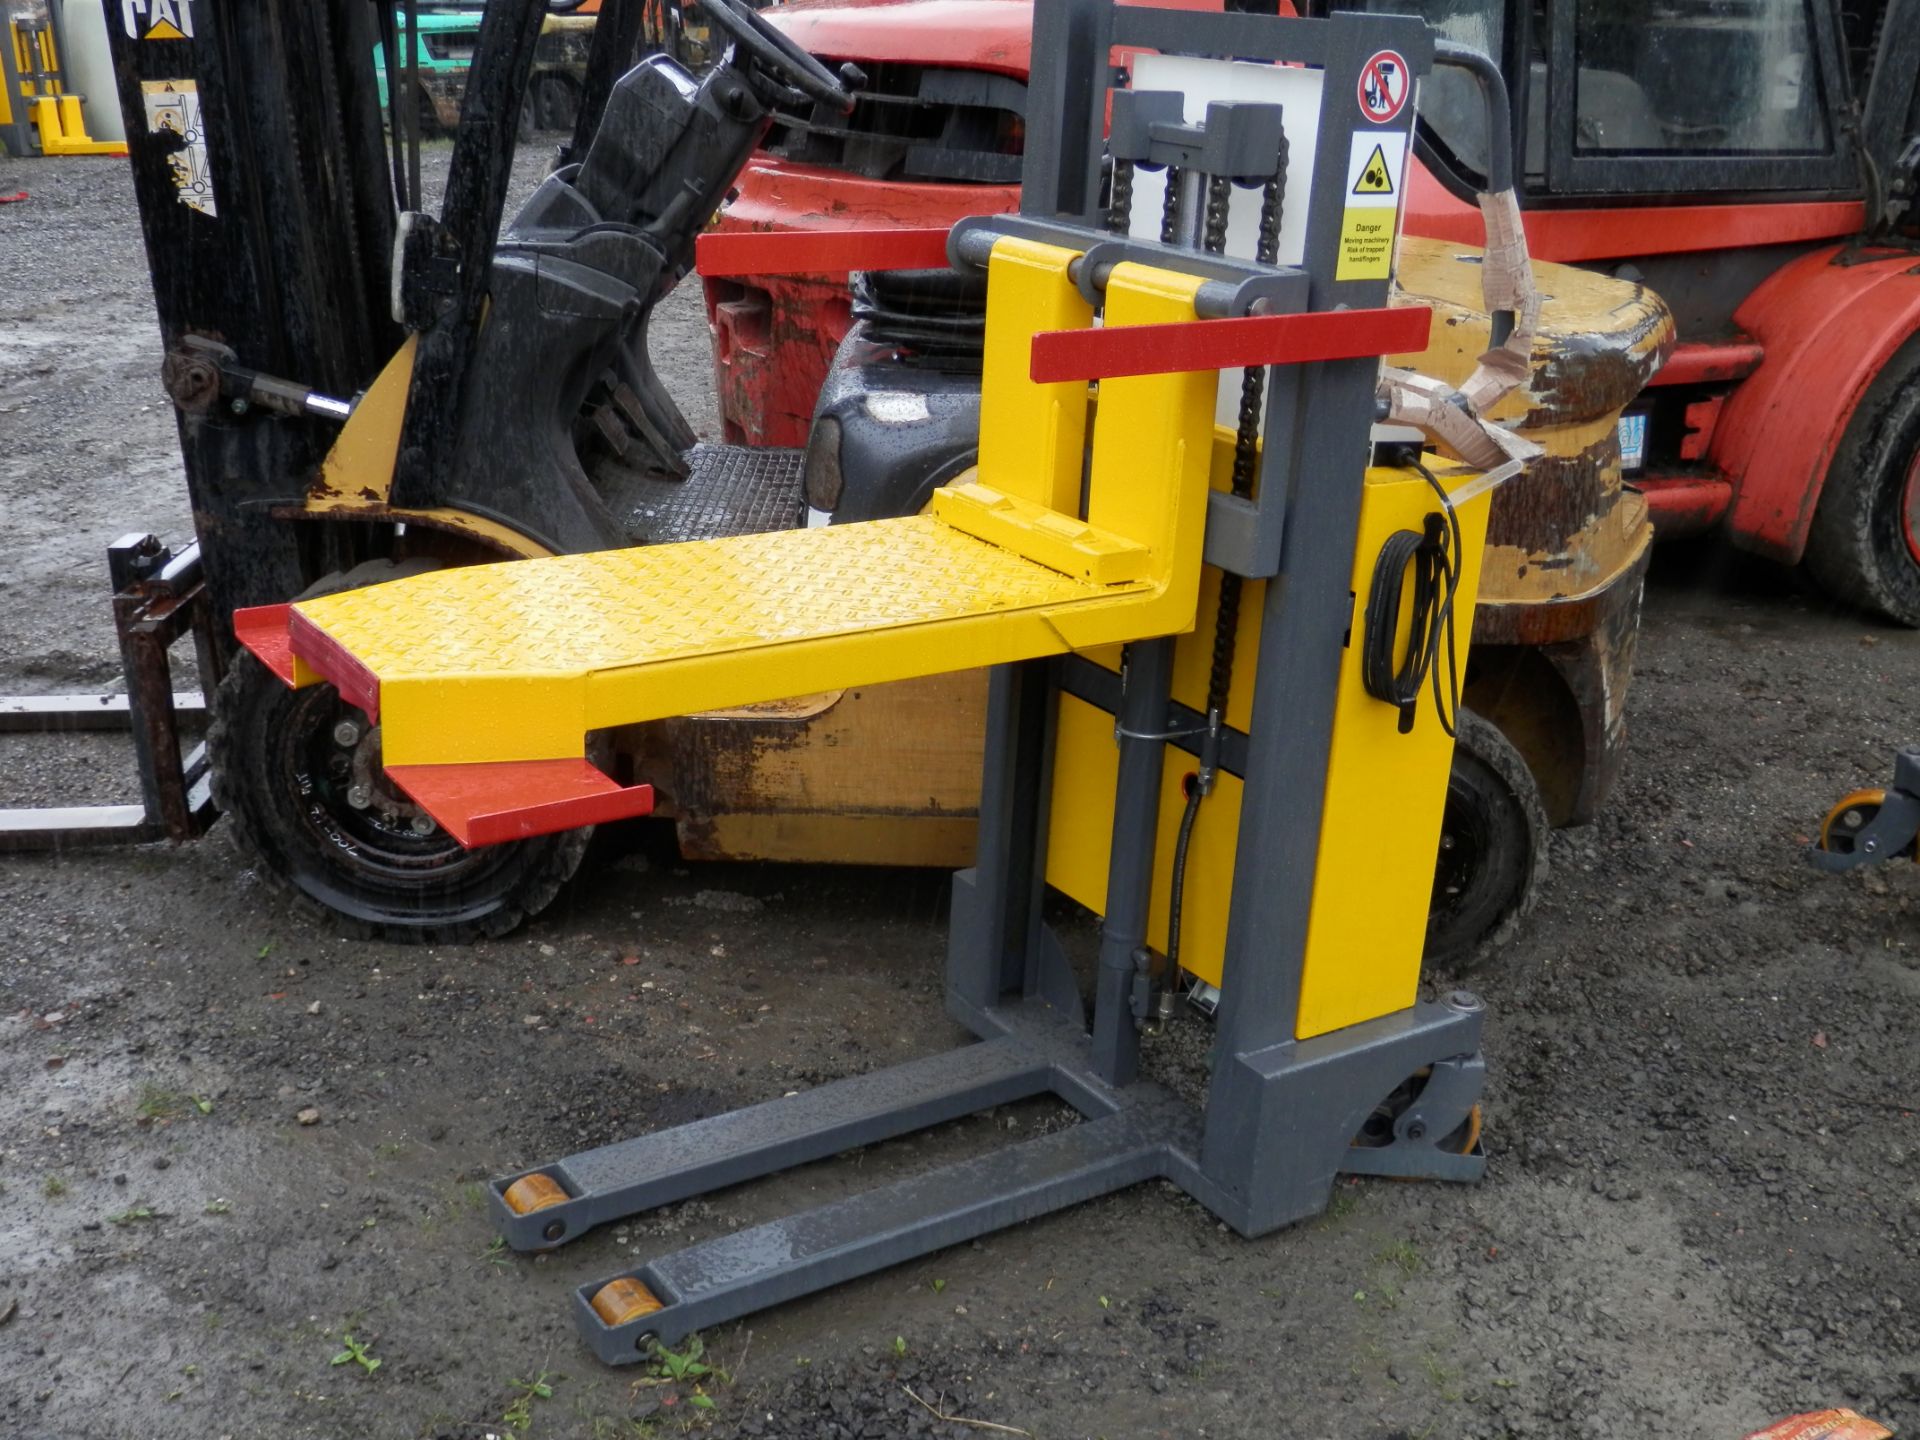 NEW WARRIOR 12V ELECTRIC PALLET TRUCK, 5 AVAILABLE. 250KG LIFT CAPACITY, 1000MM. (2 OF 5) - Image 2 of 5